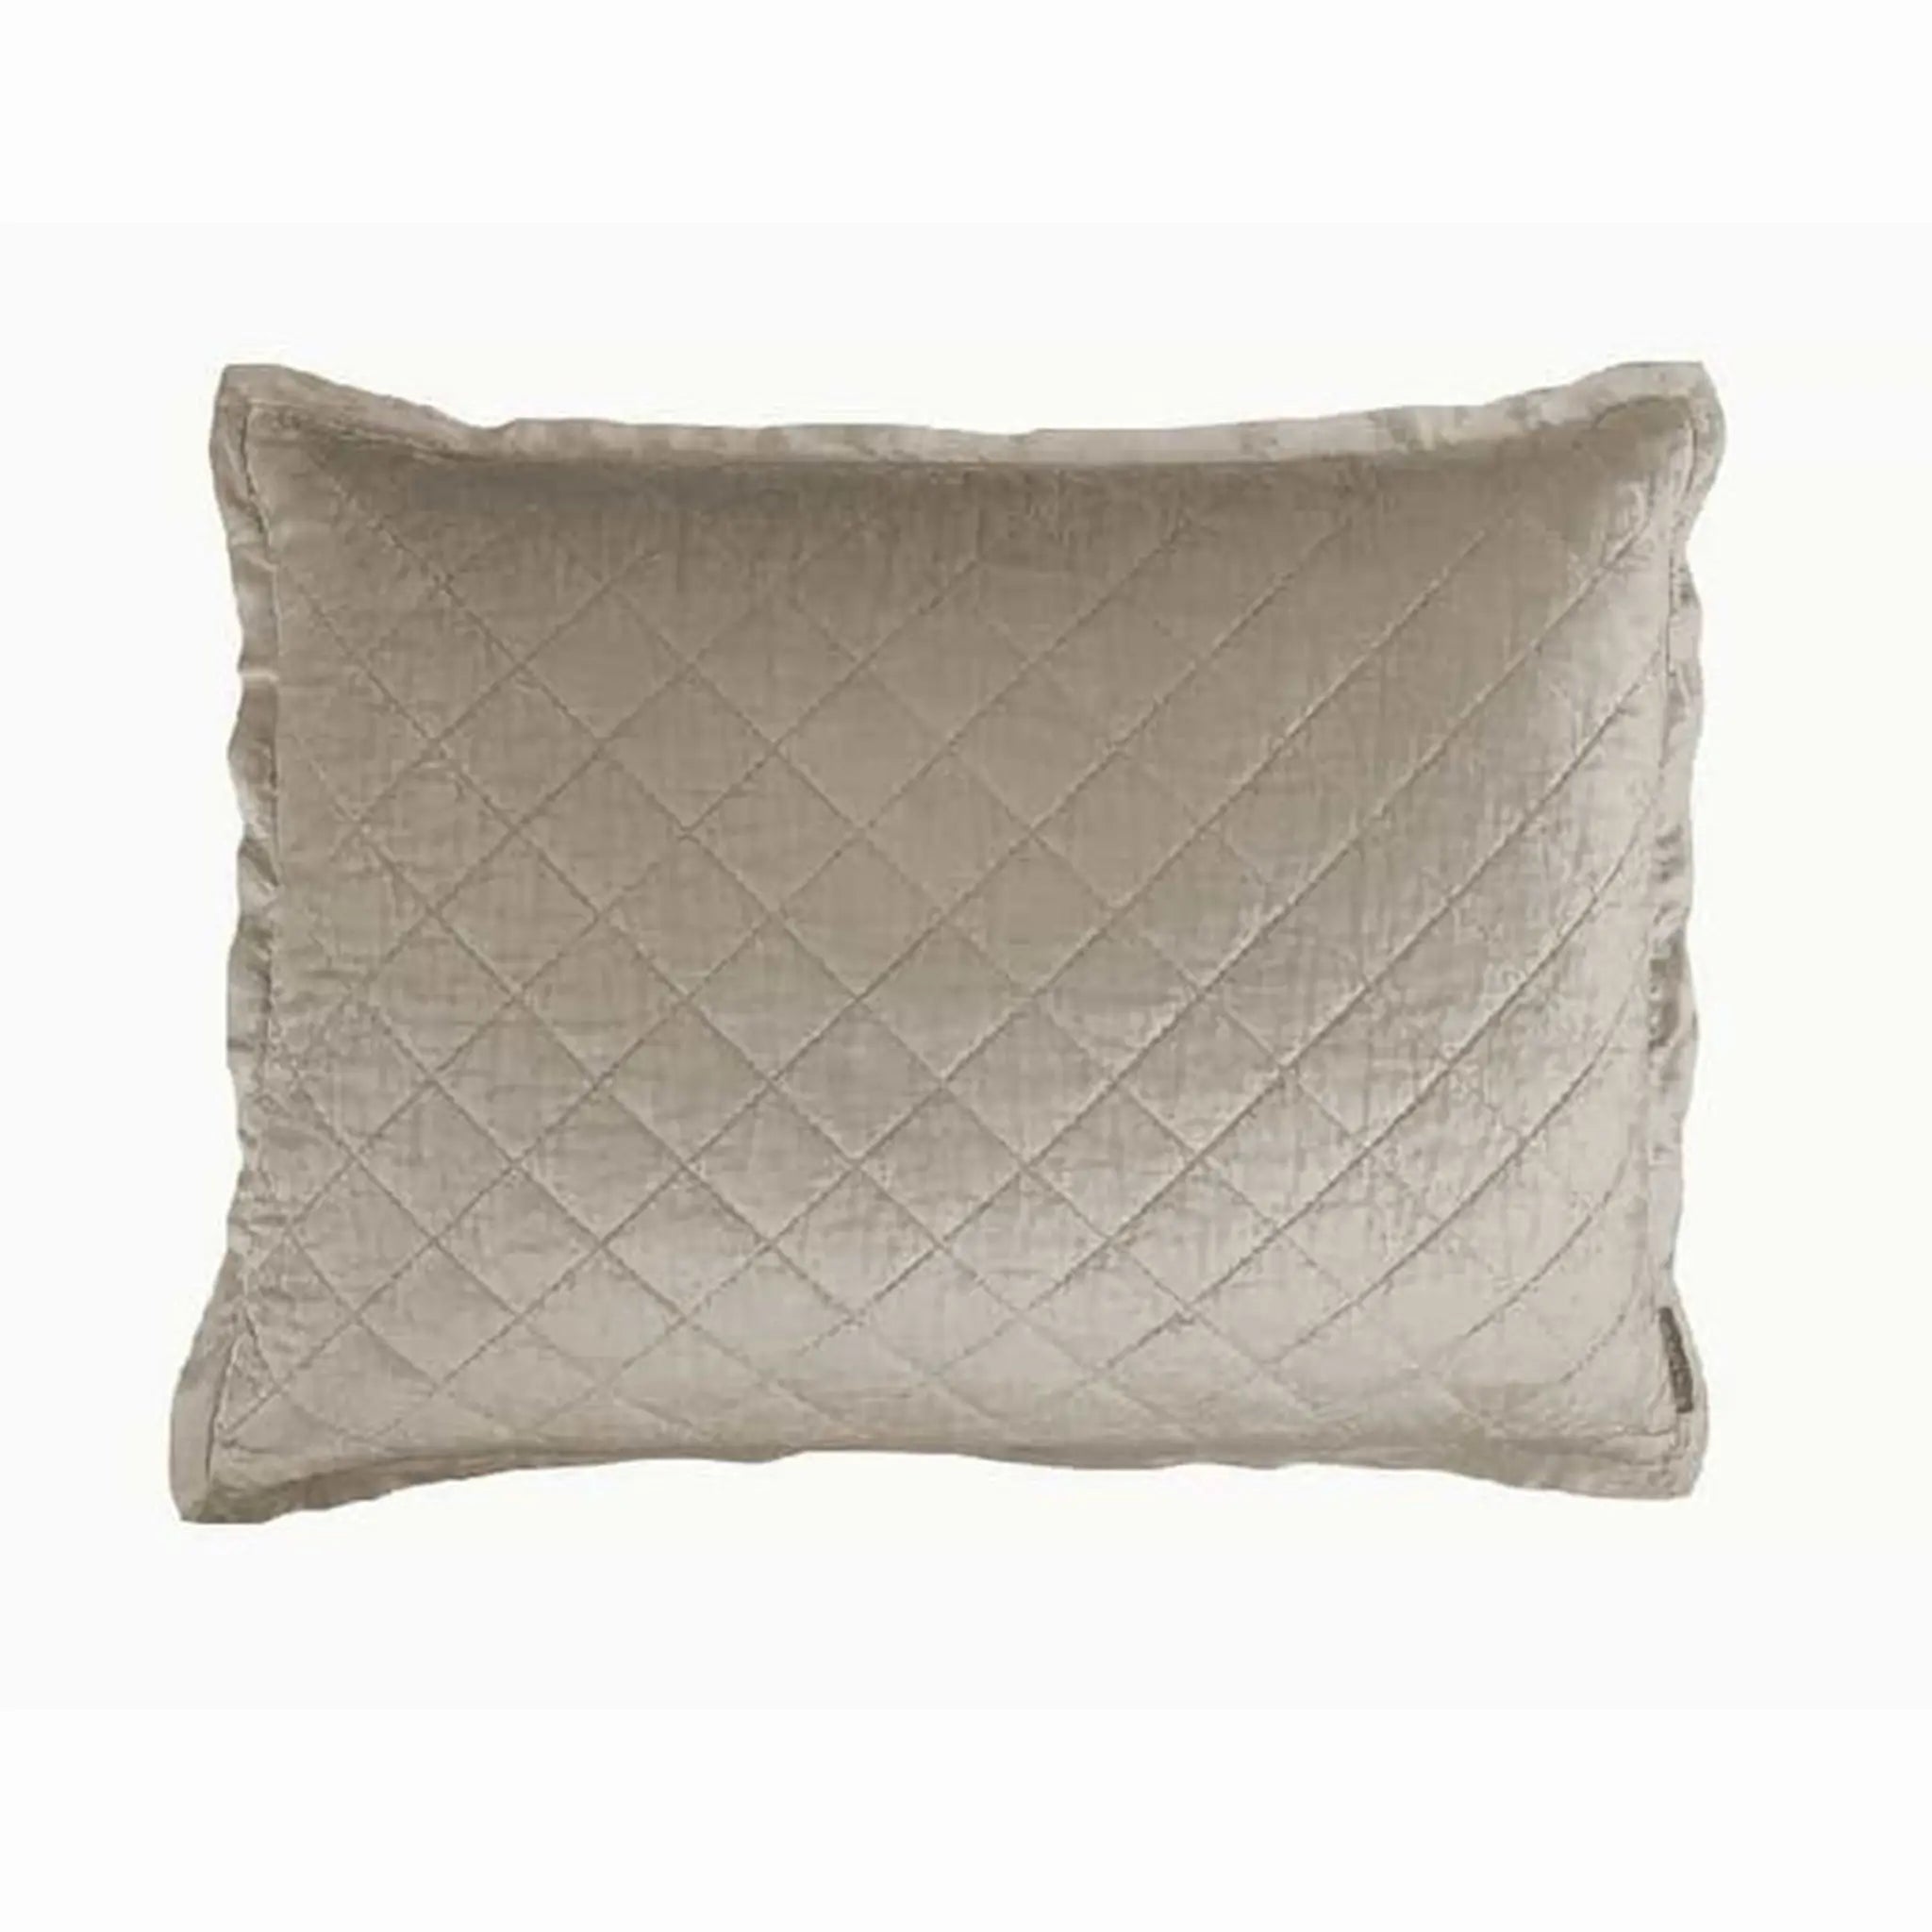 Lili Alessandra Chloe Diamond Quilted Standard Pillow in Fawn